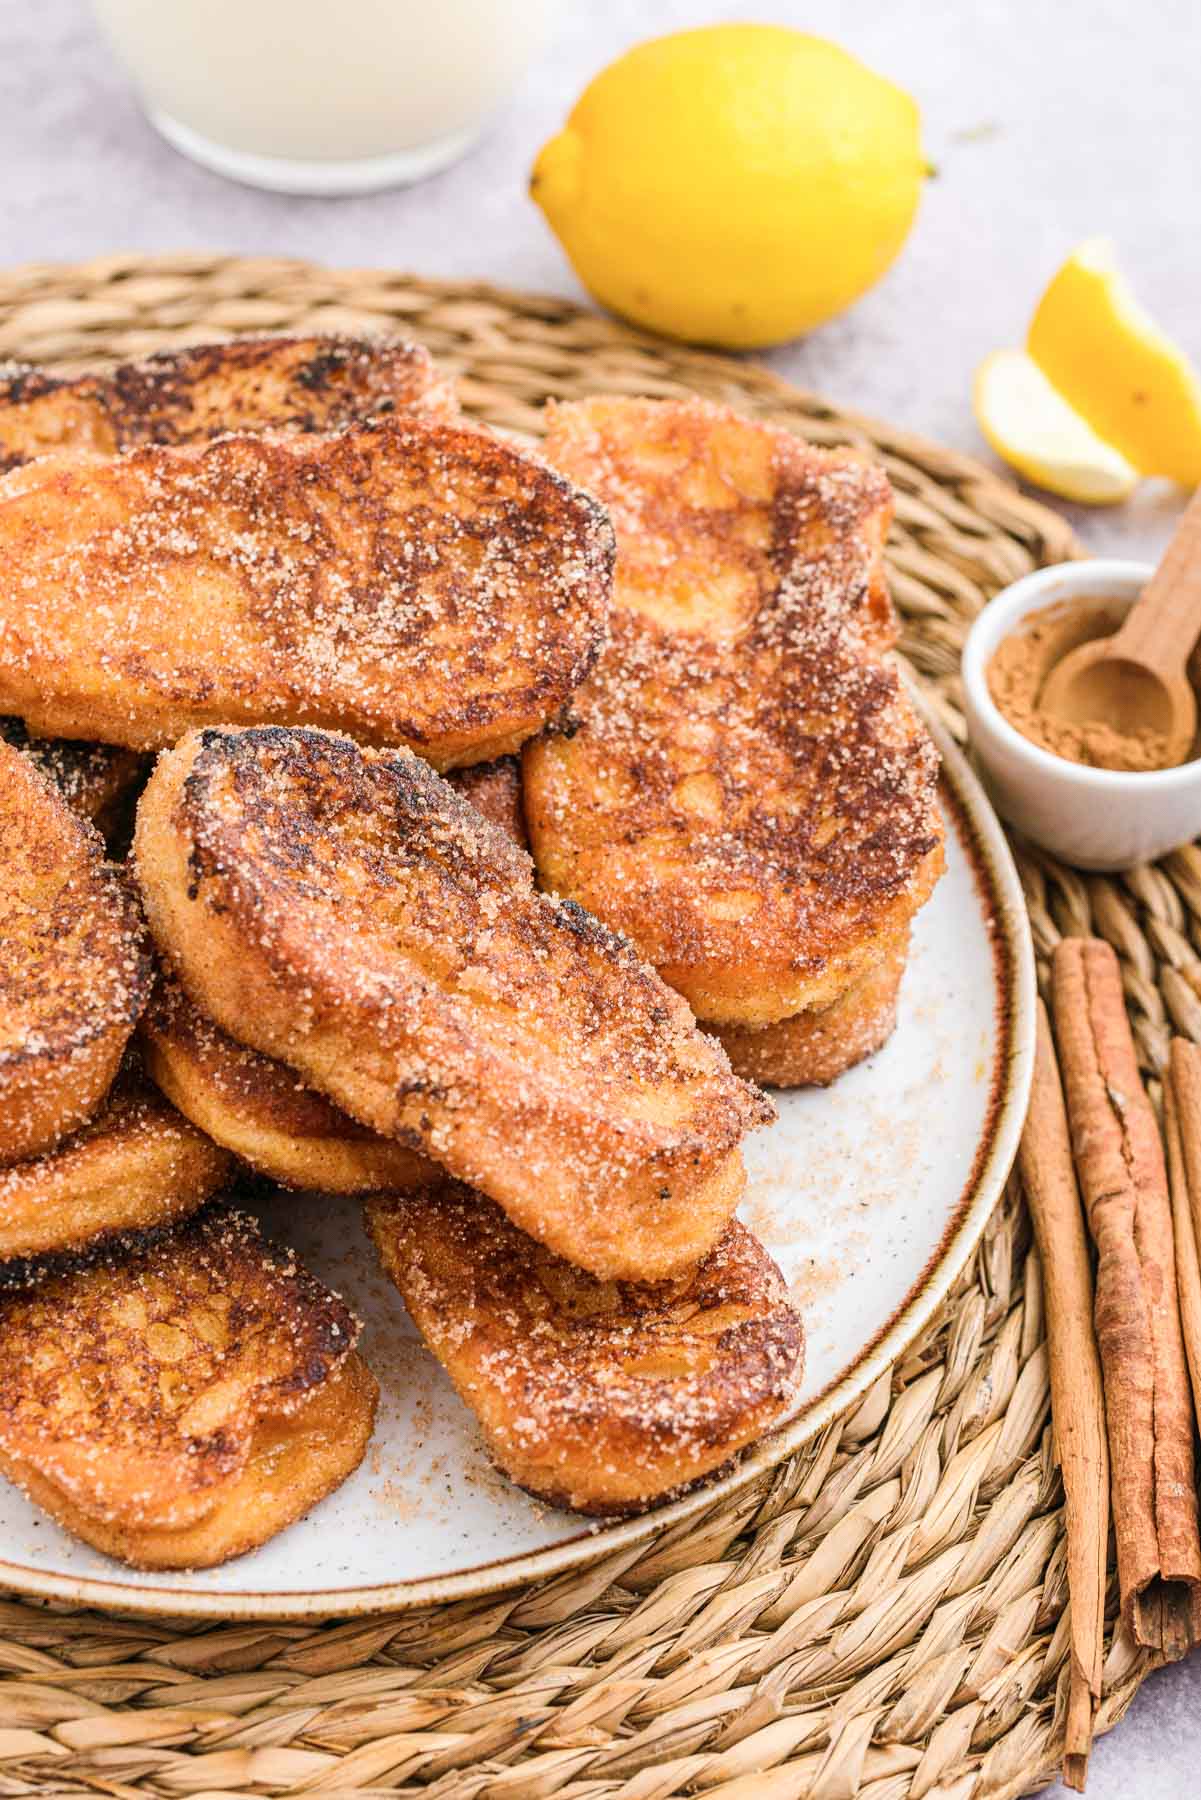 pile of french toast on white plate sitting on wicker placemat with lemon beside.